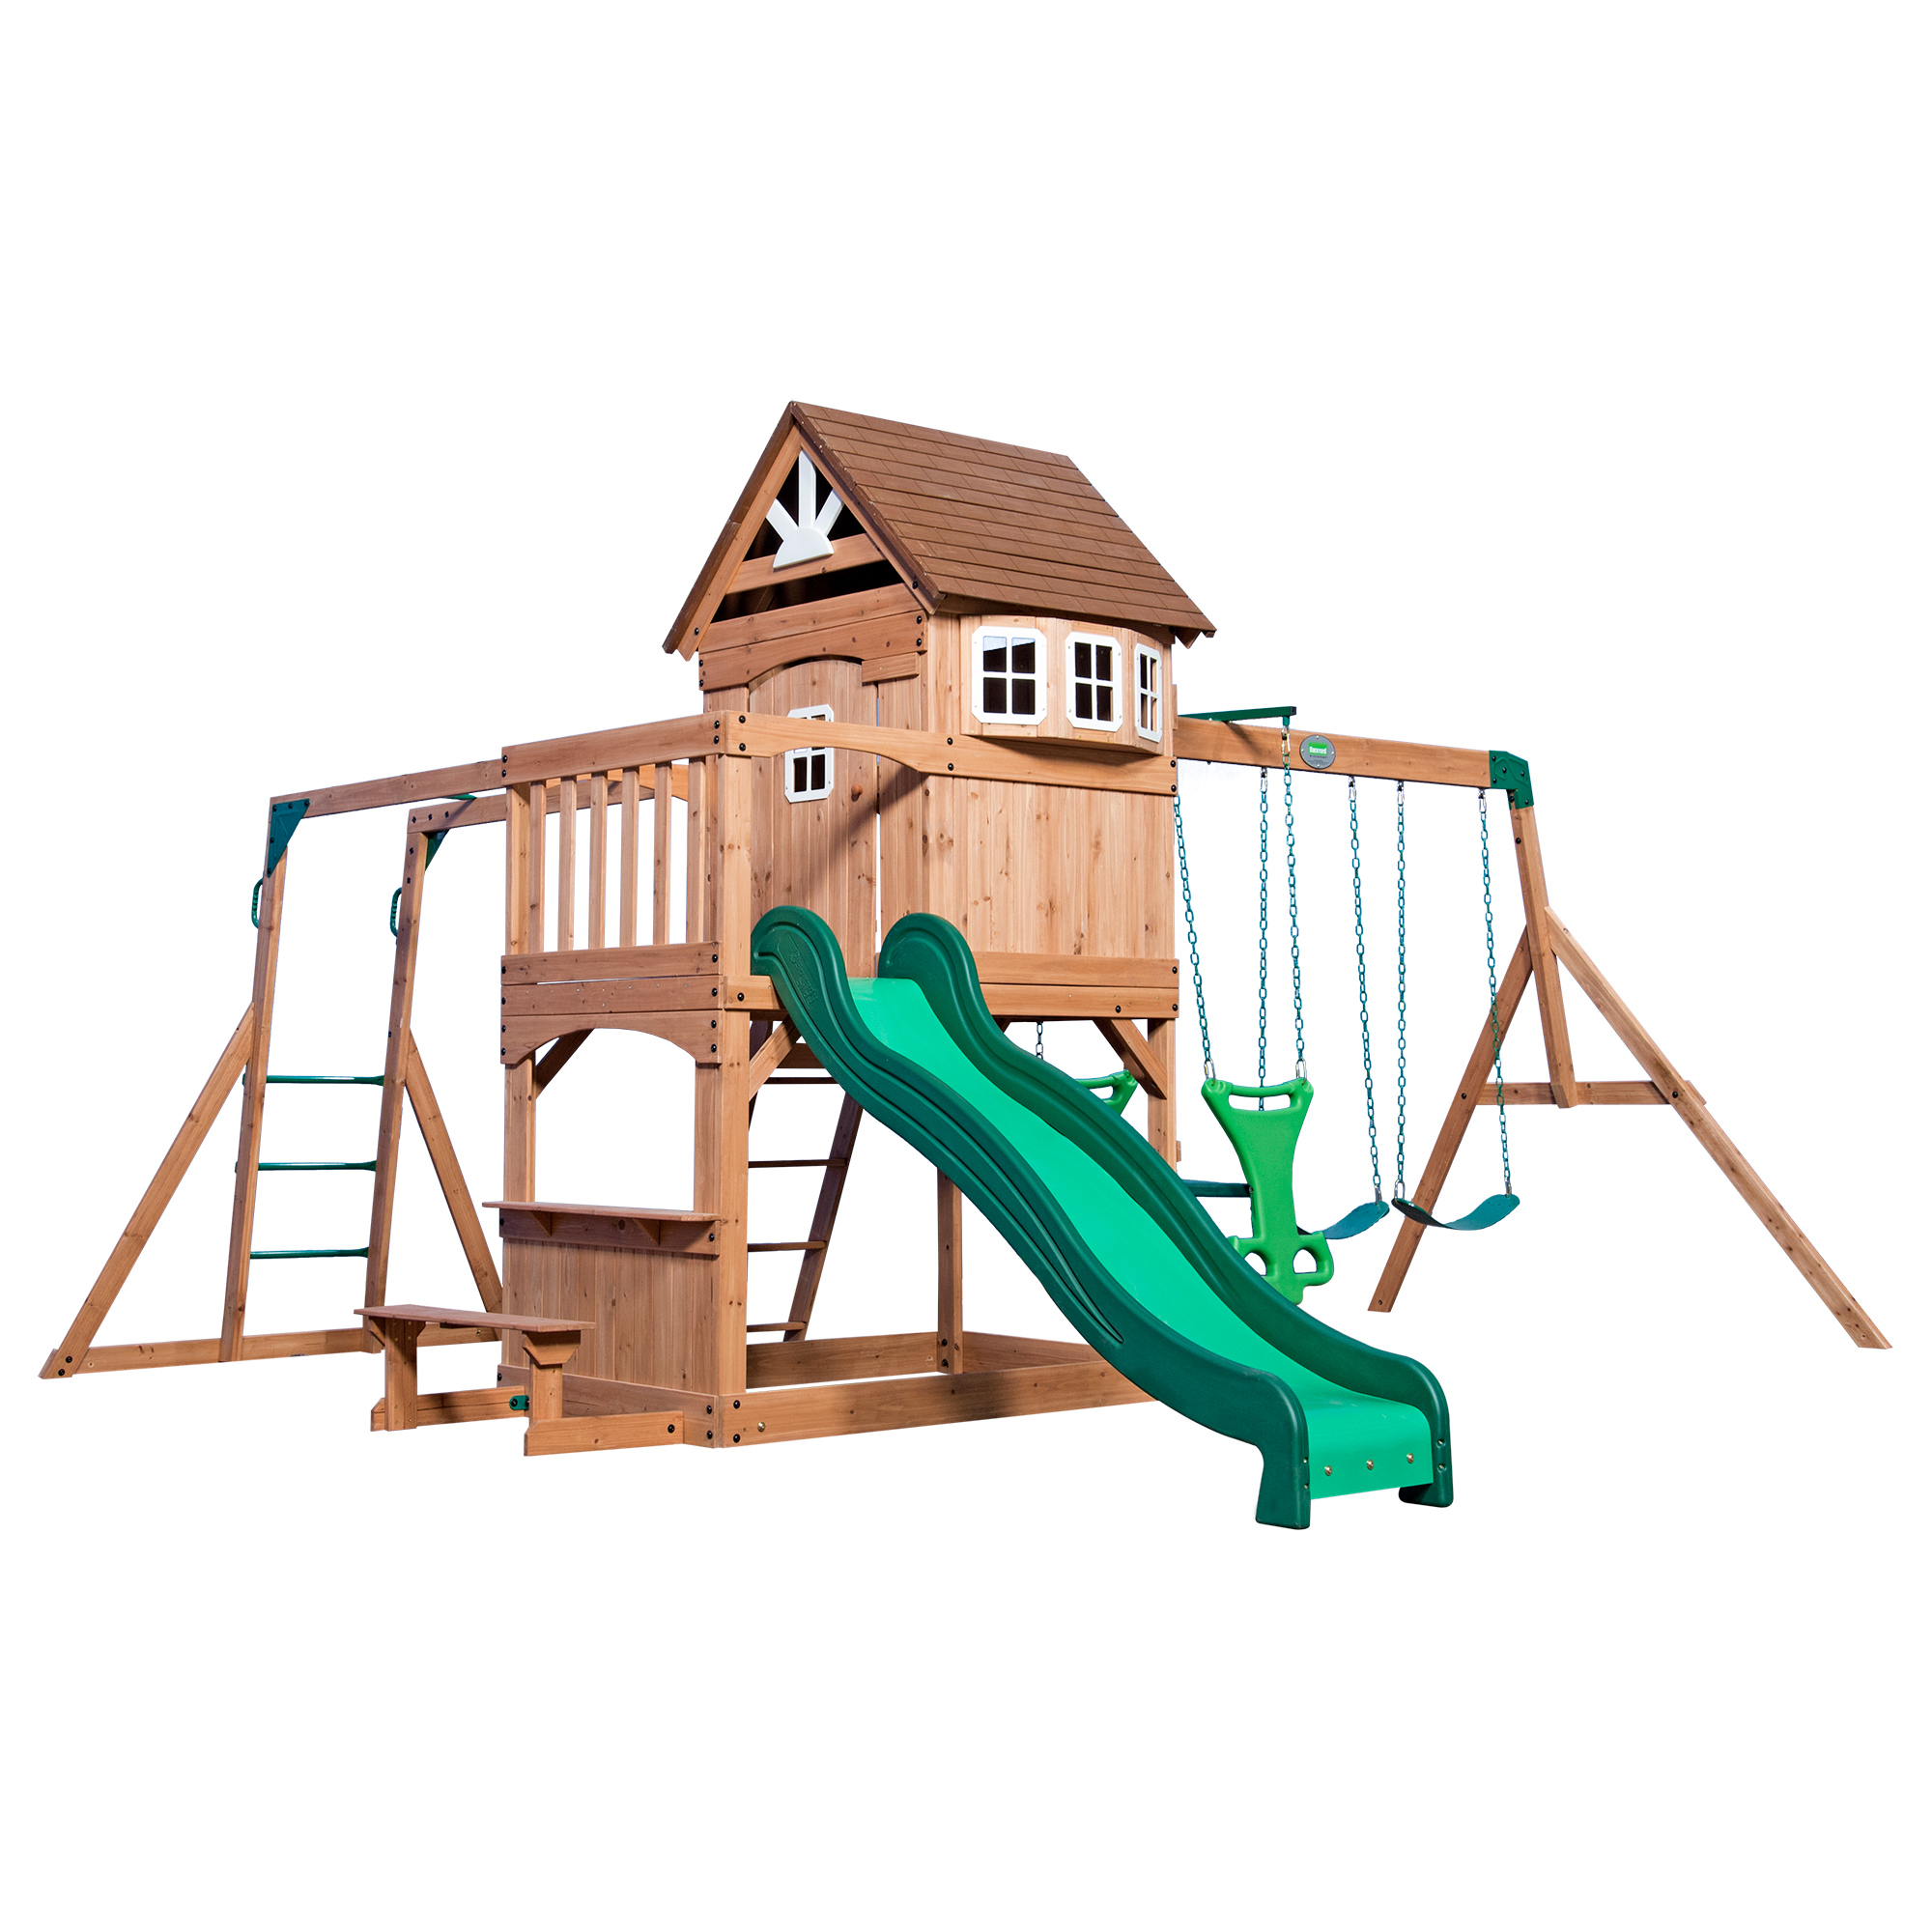 Montpelier Swing Set with Slide and Climbing frame